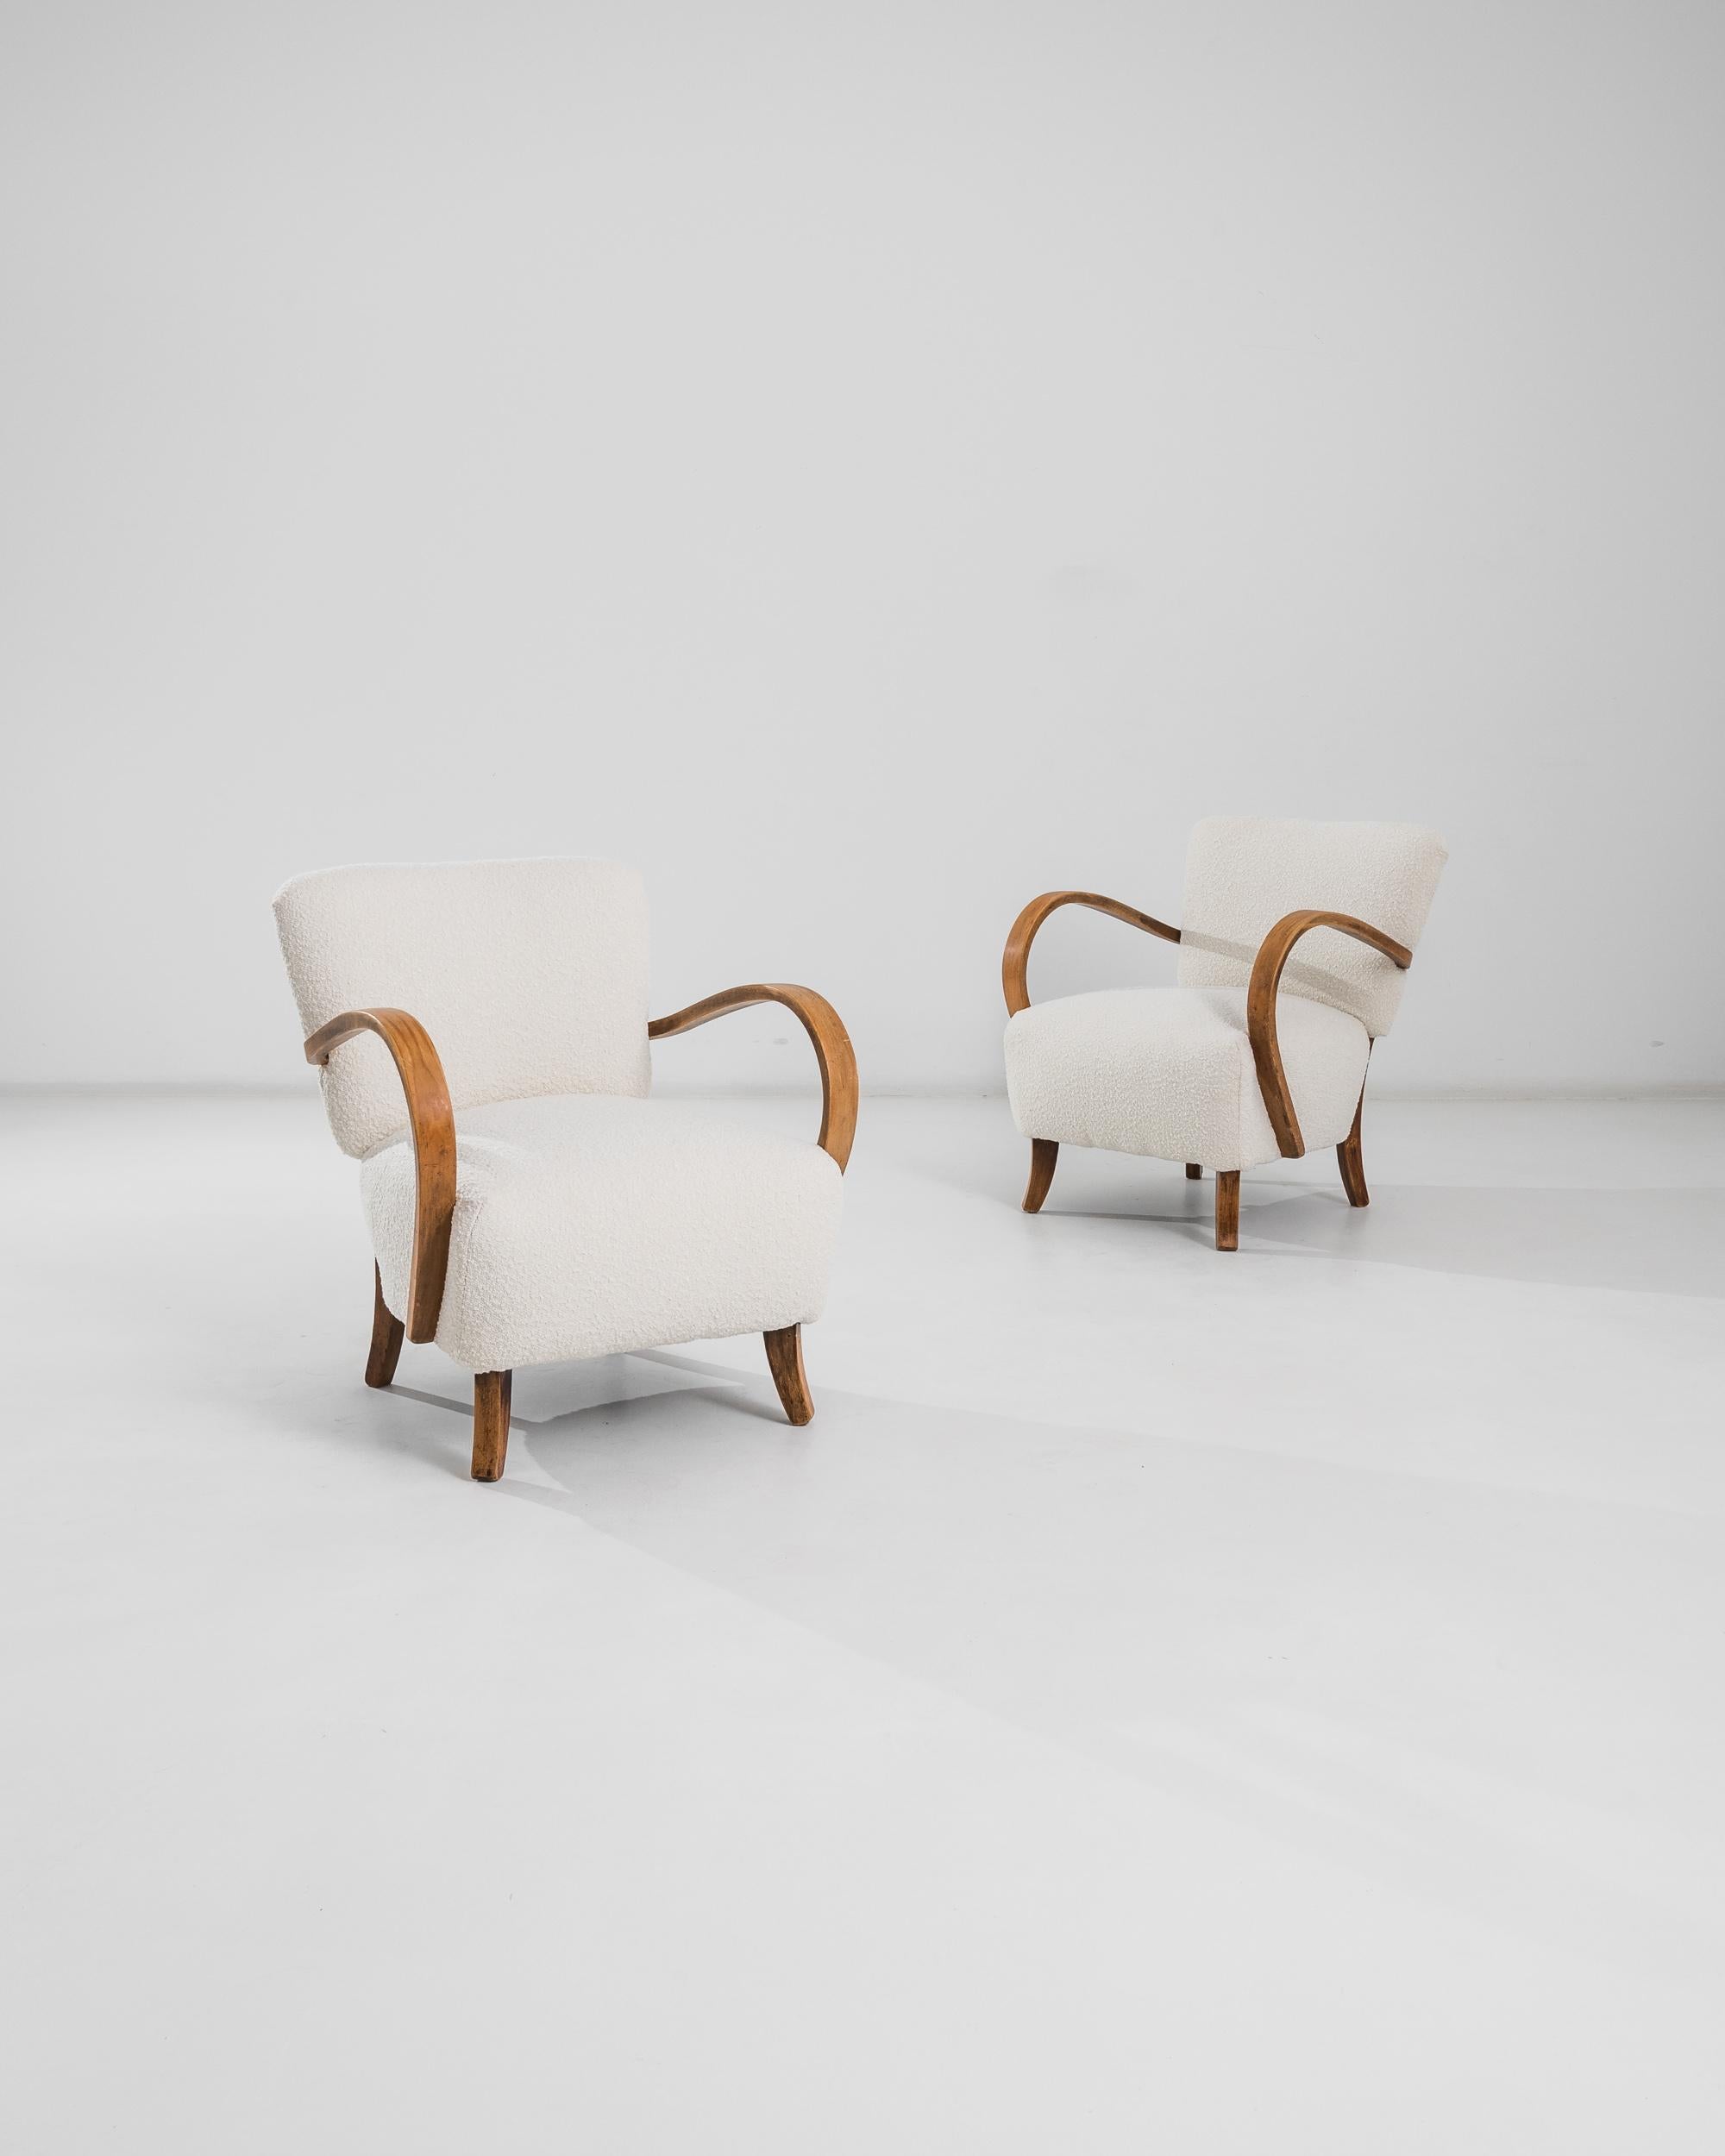 The dramatic curve of the bentwood armrests instantly distinguishes armchairs designed by J. Halabala, one of the most prominent industrial designers from Czechia. Manufactured circa 1930, these lounge armchairs flaunt a modernist anatomy